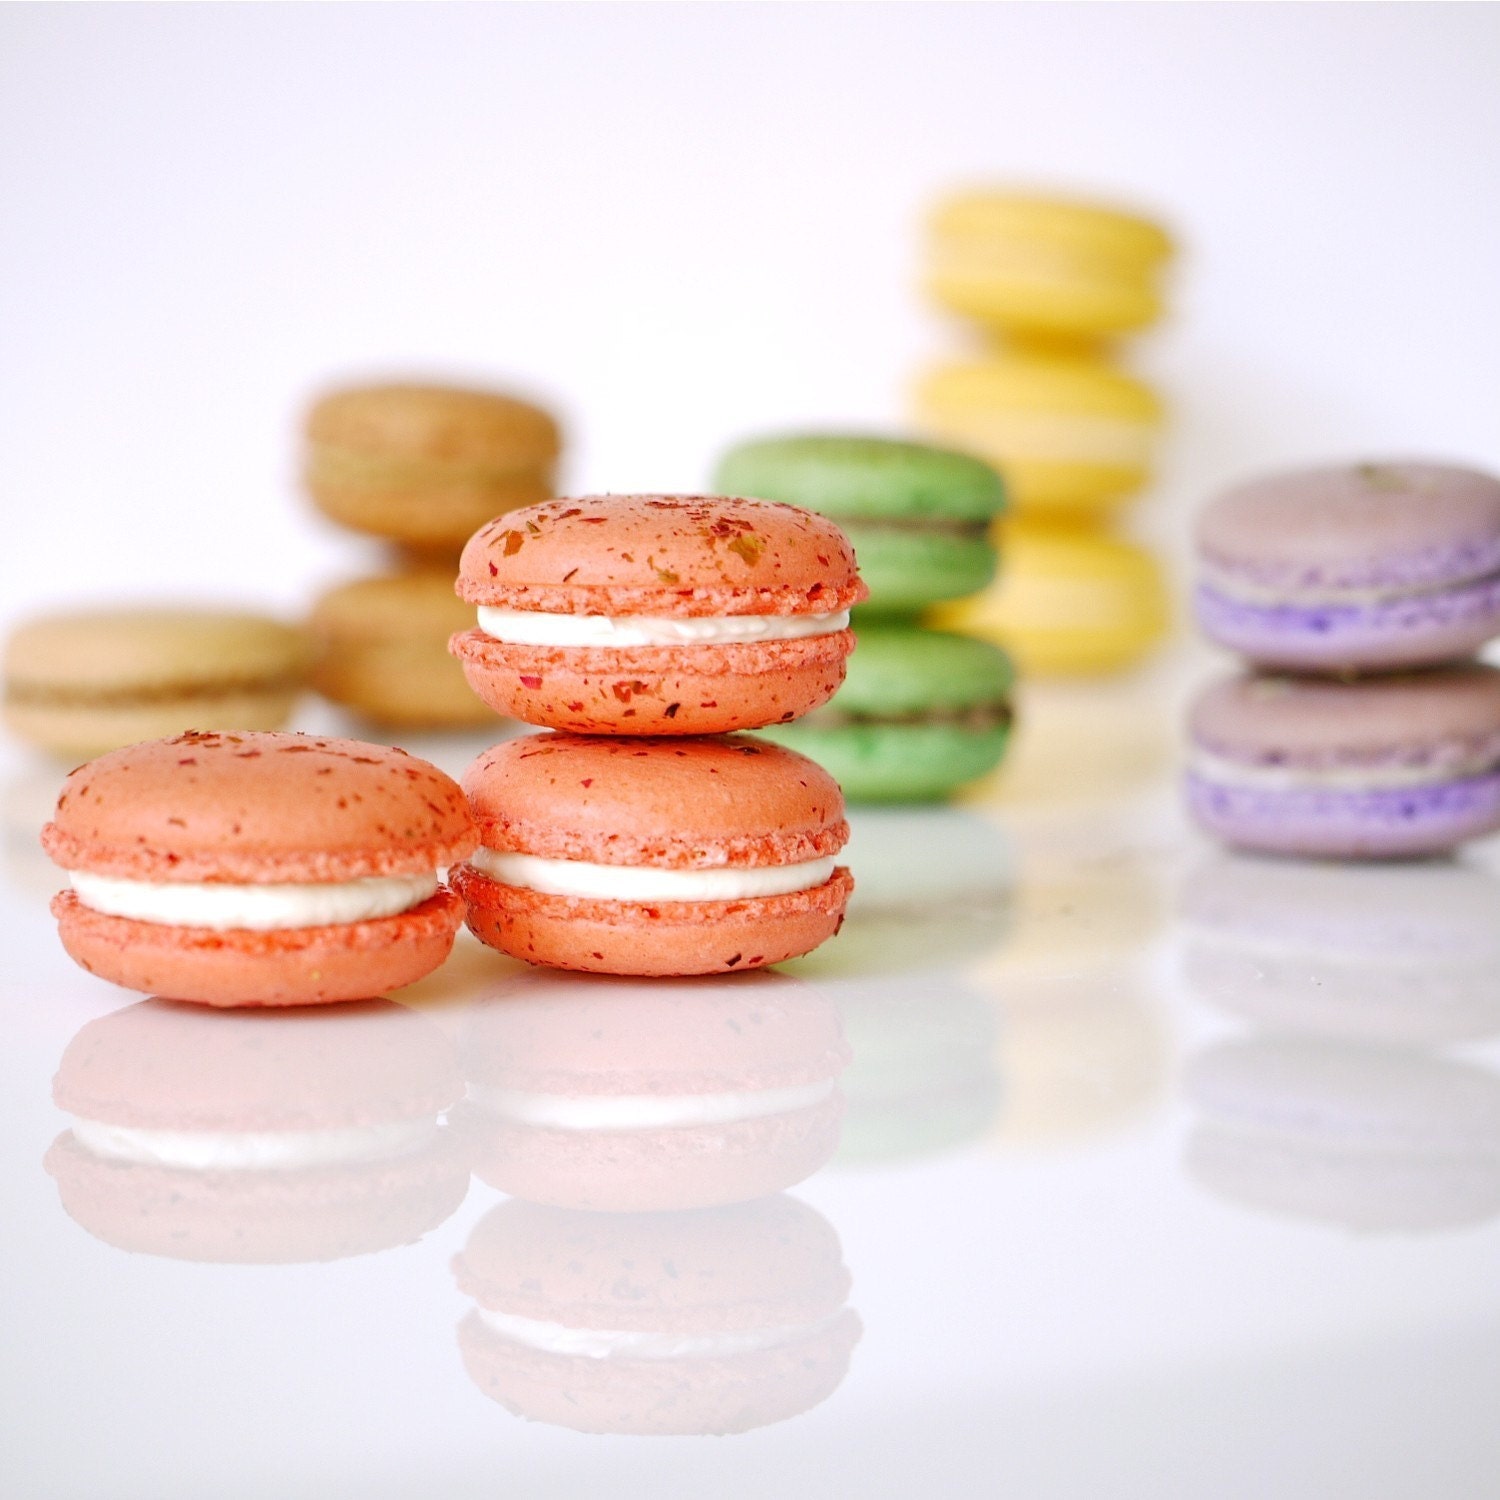 24 Assorted Regular French Macarons - Perfect for tea time